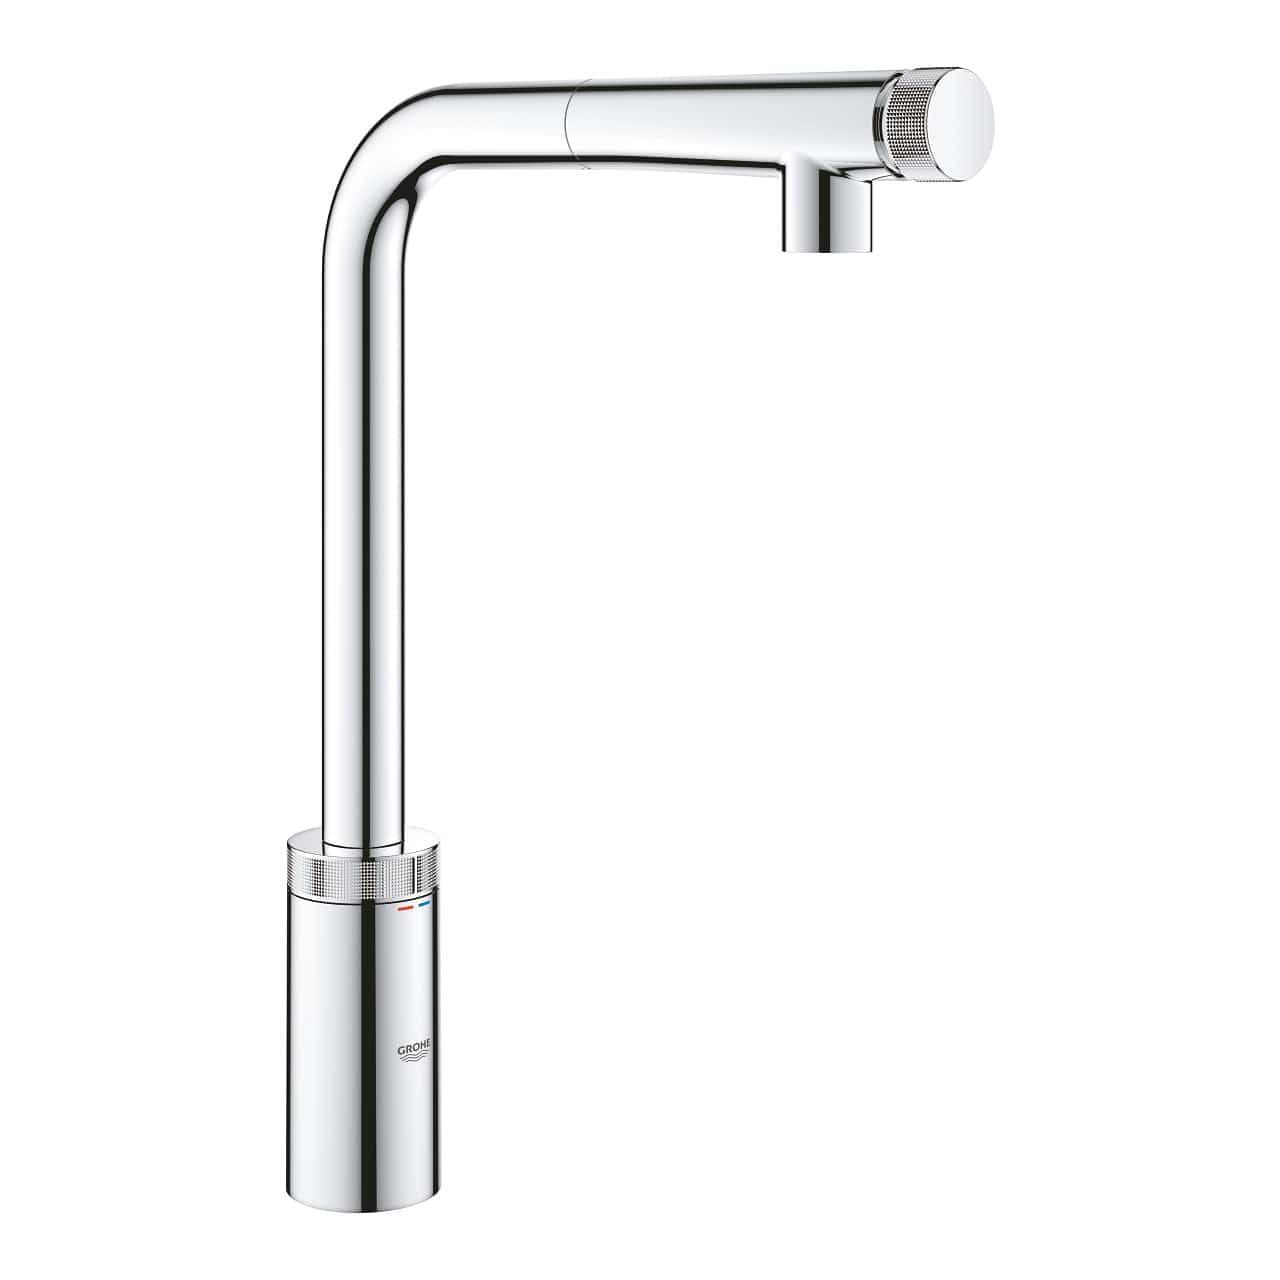 Grohe Minta Smart Control Sink Mixer | Supply Master | Accra, Ghana Kitchen Tap Buy Tools hardware Building materials